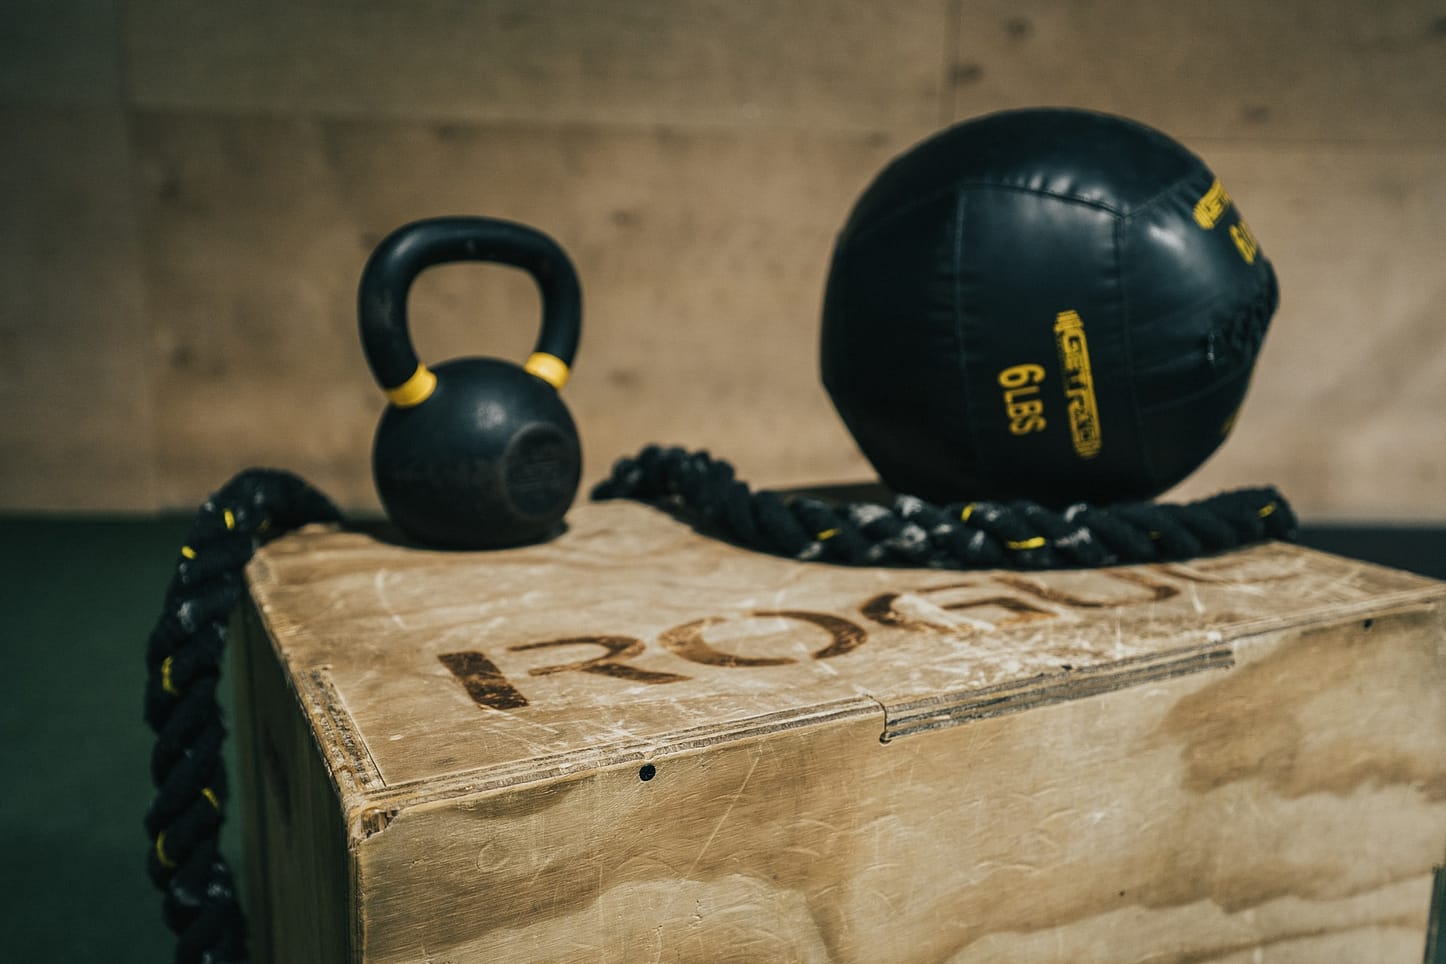 This image shows a gym with a kettlebell and a ball like you'd use for your workouts.